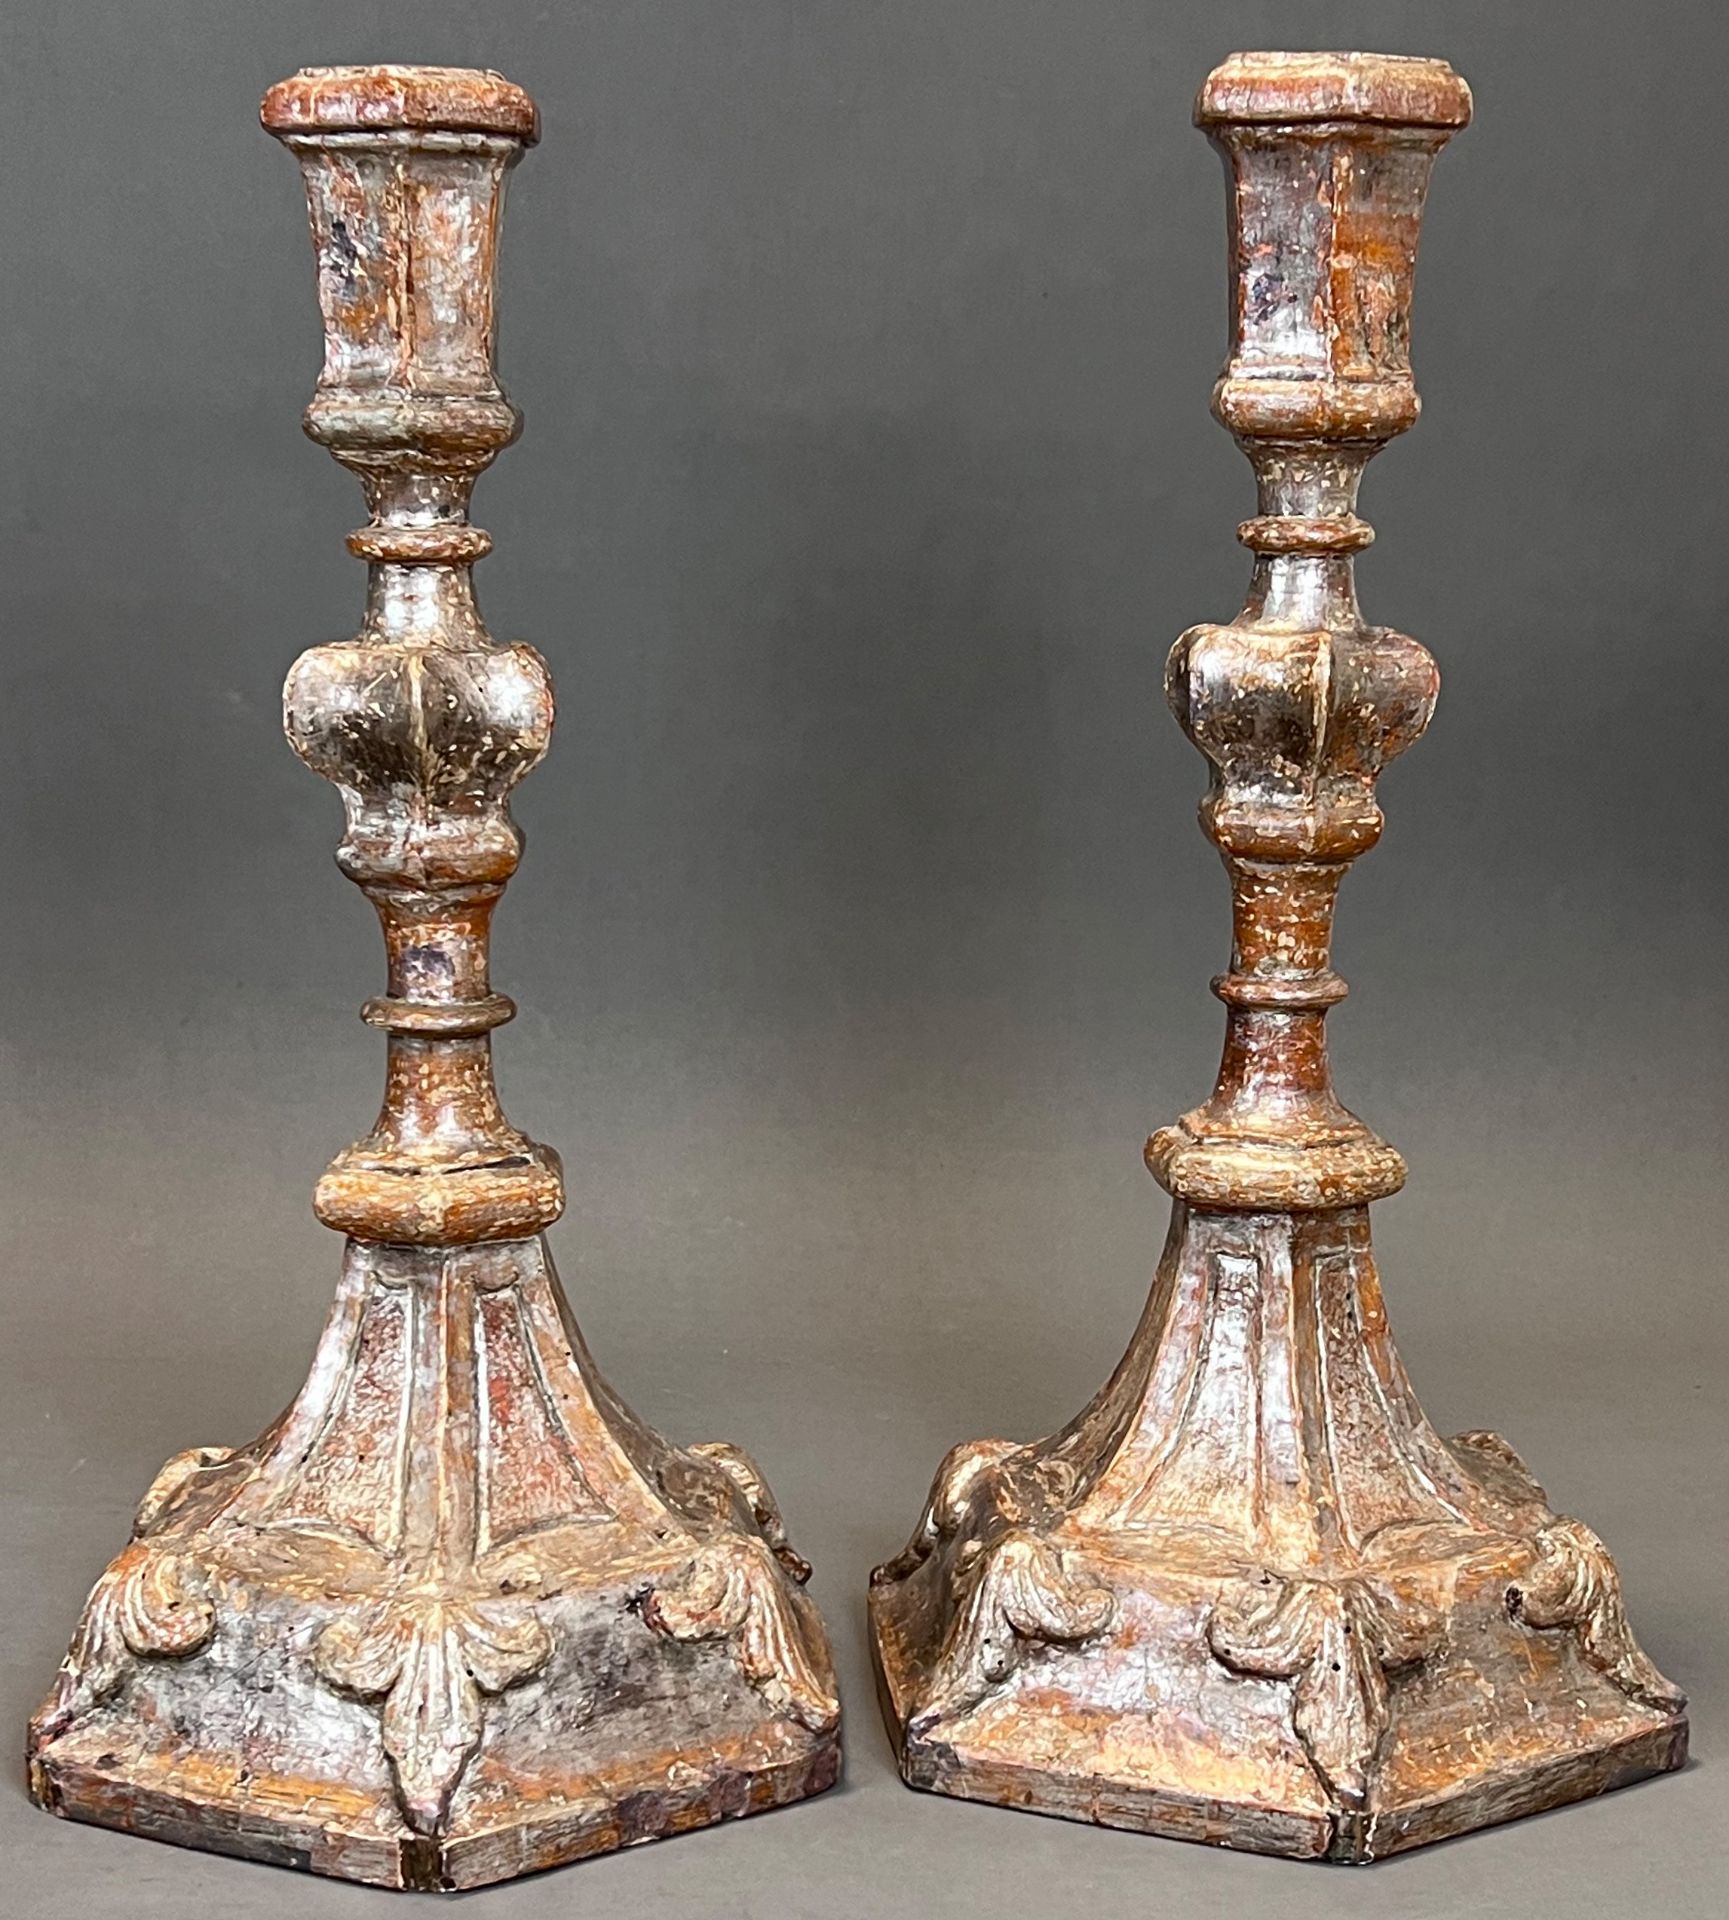 A pair of church altar candlesticks. Wood. Probably 19th century. - Image 3 of 9